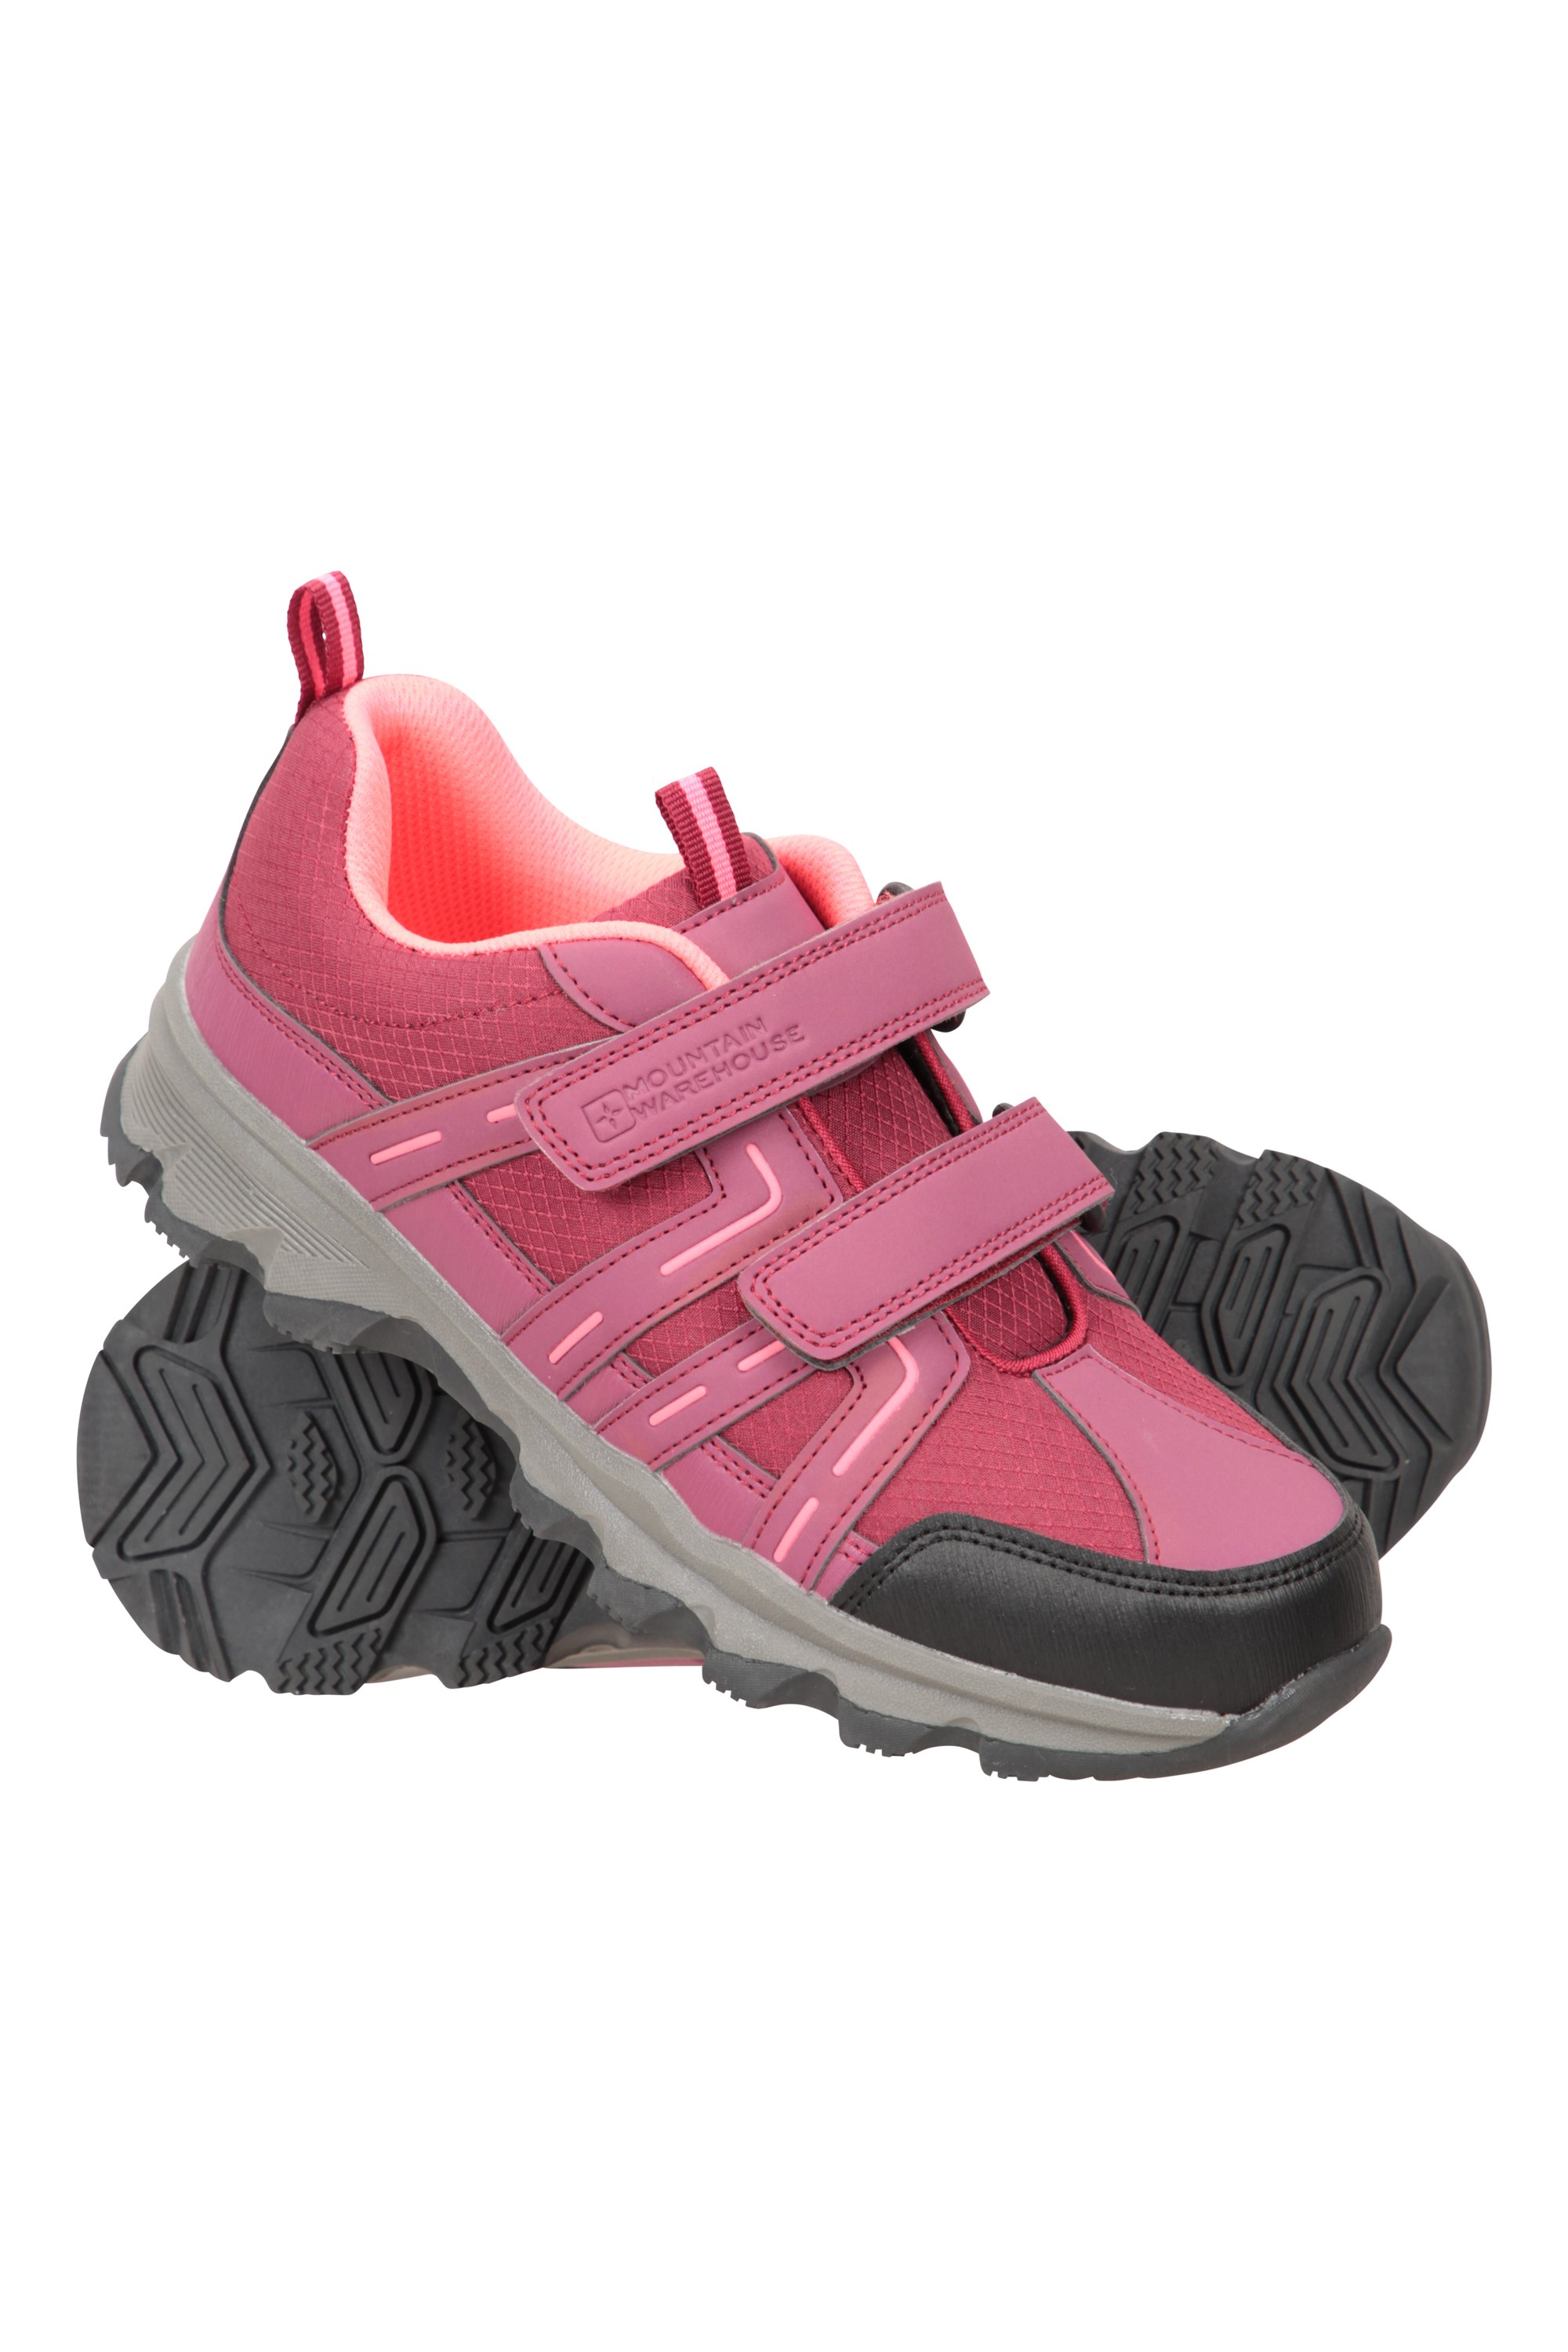 Cannonball Kids Hiking Shoes - Pink